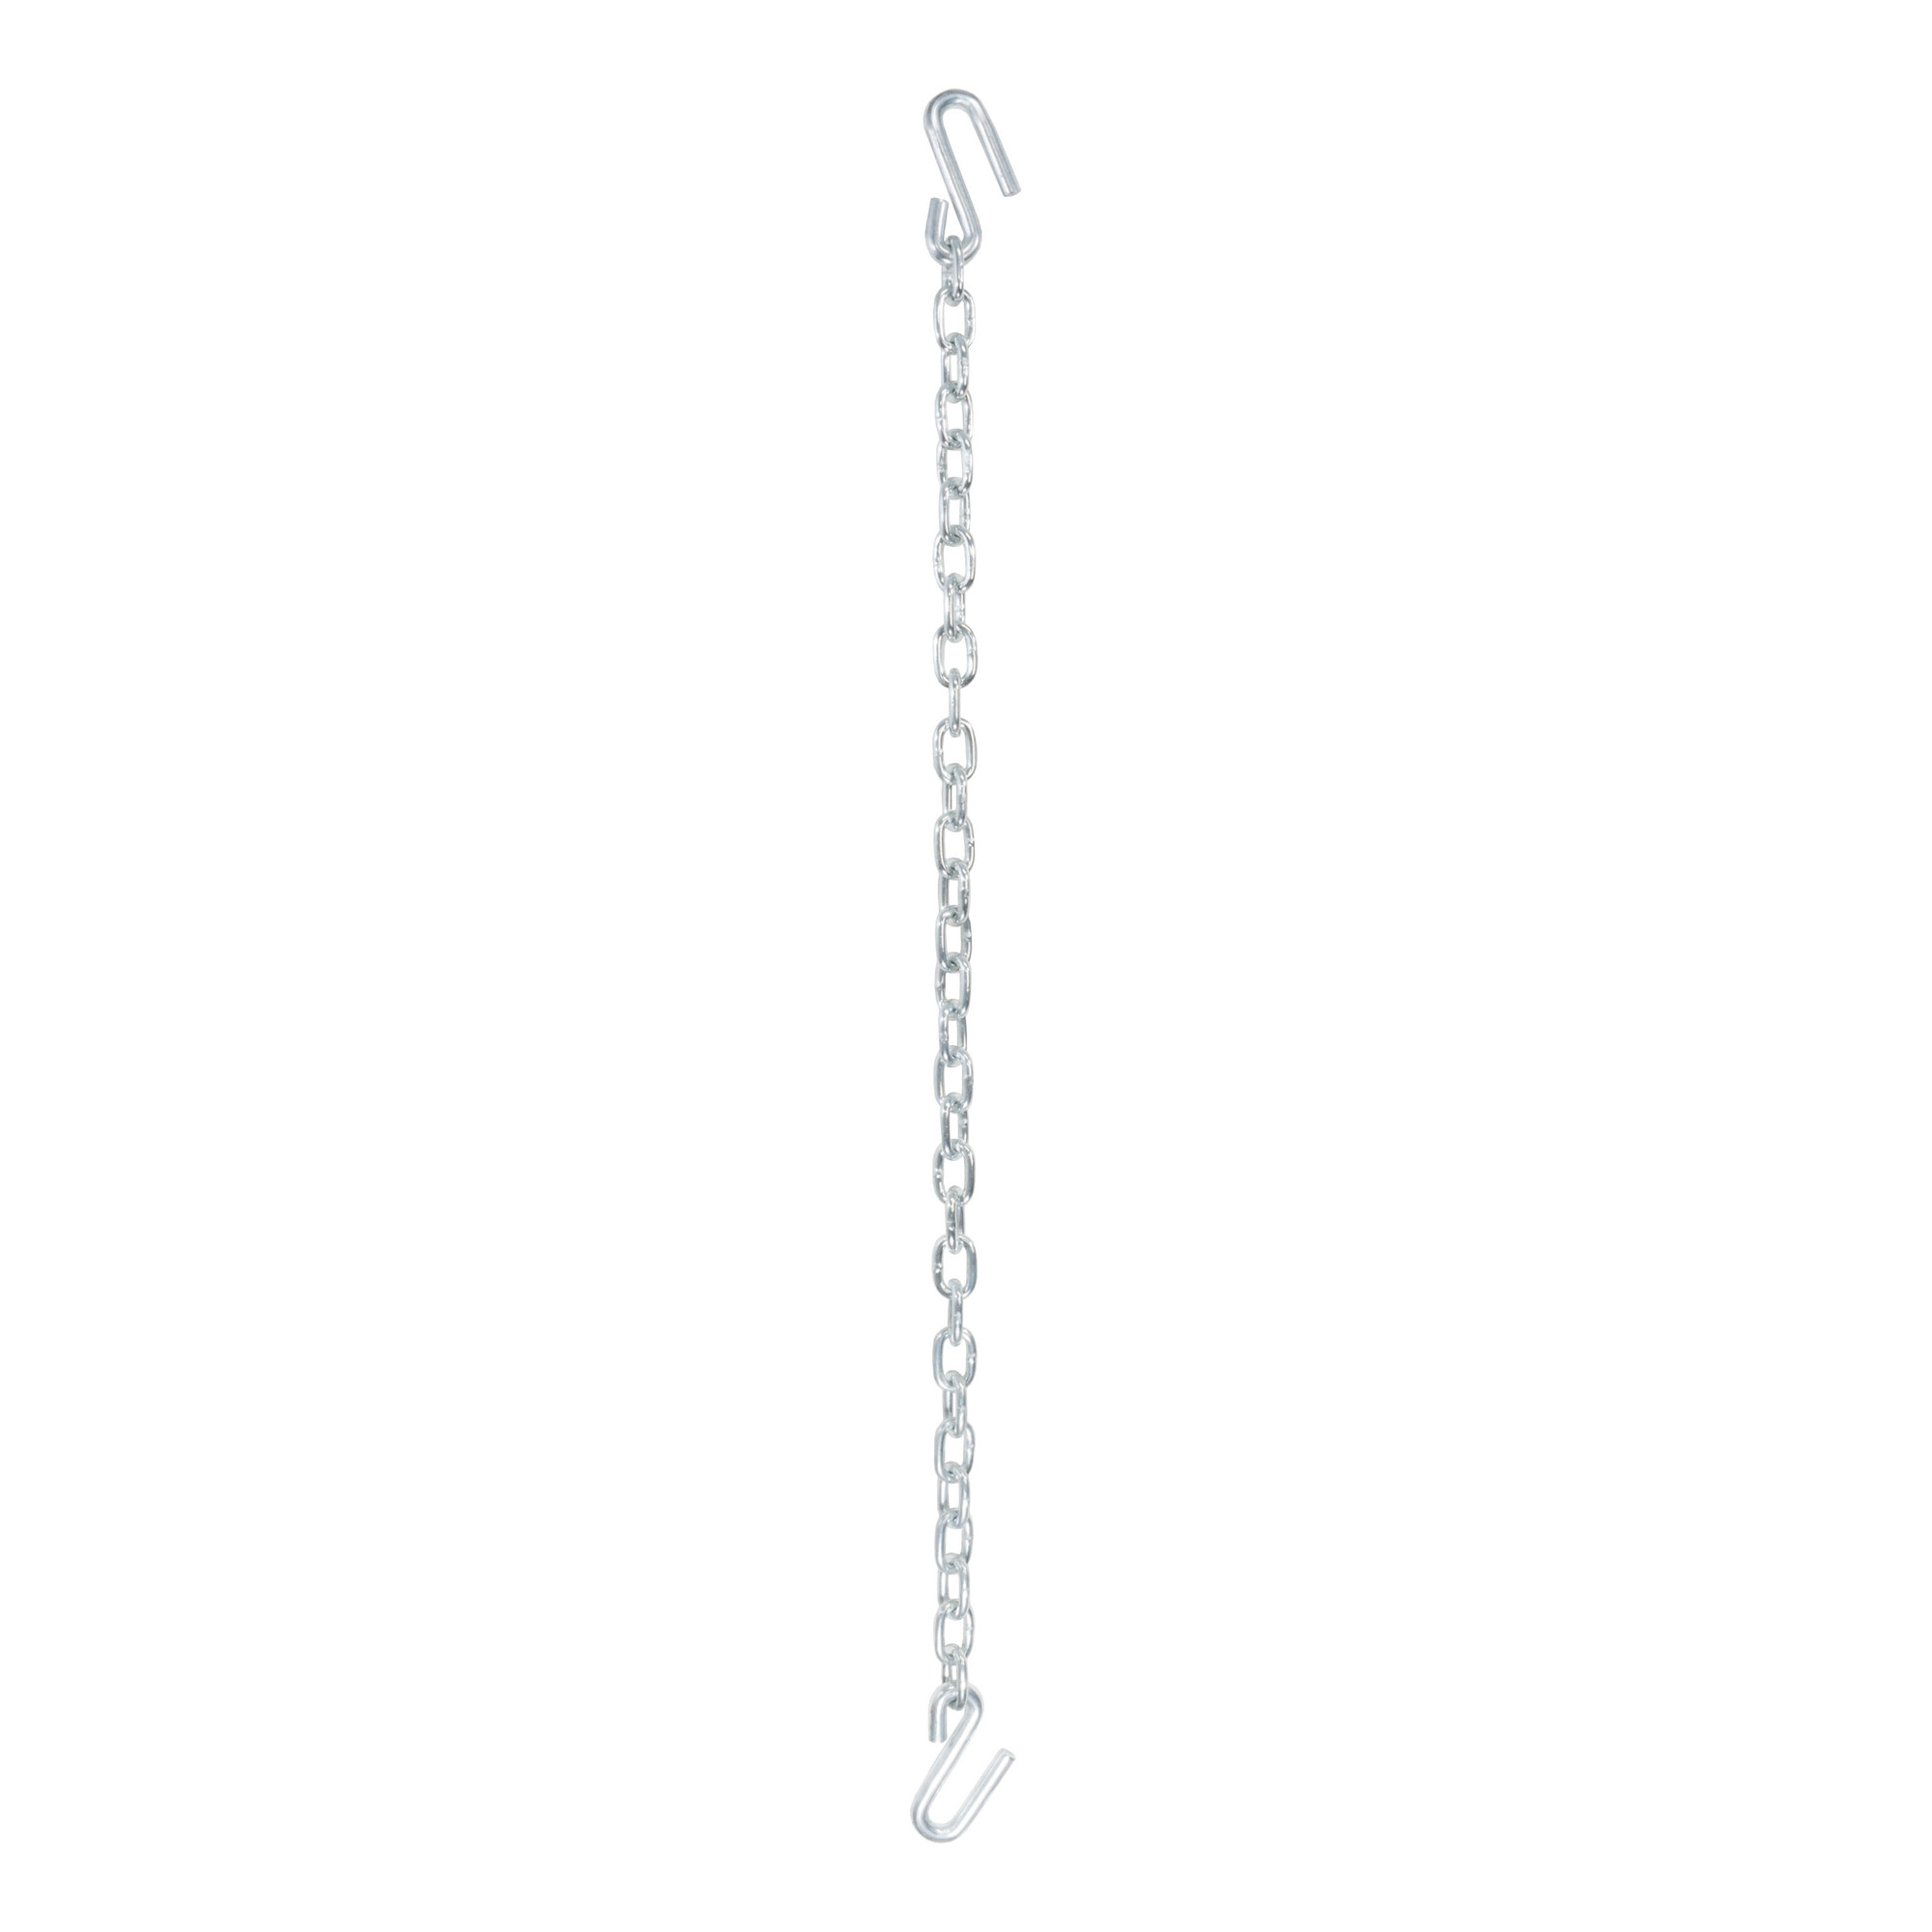 Curt Manufacturing, 48Inch Safety Chain with 2 S-Hooks, Length 48 in, Material Steel, Model 80301